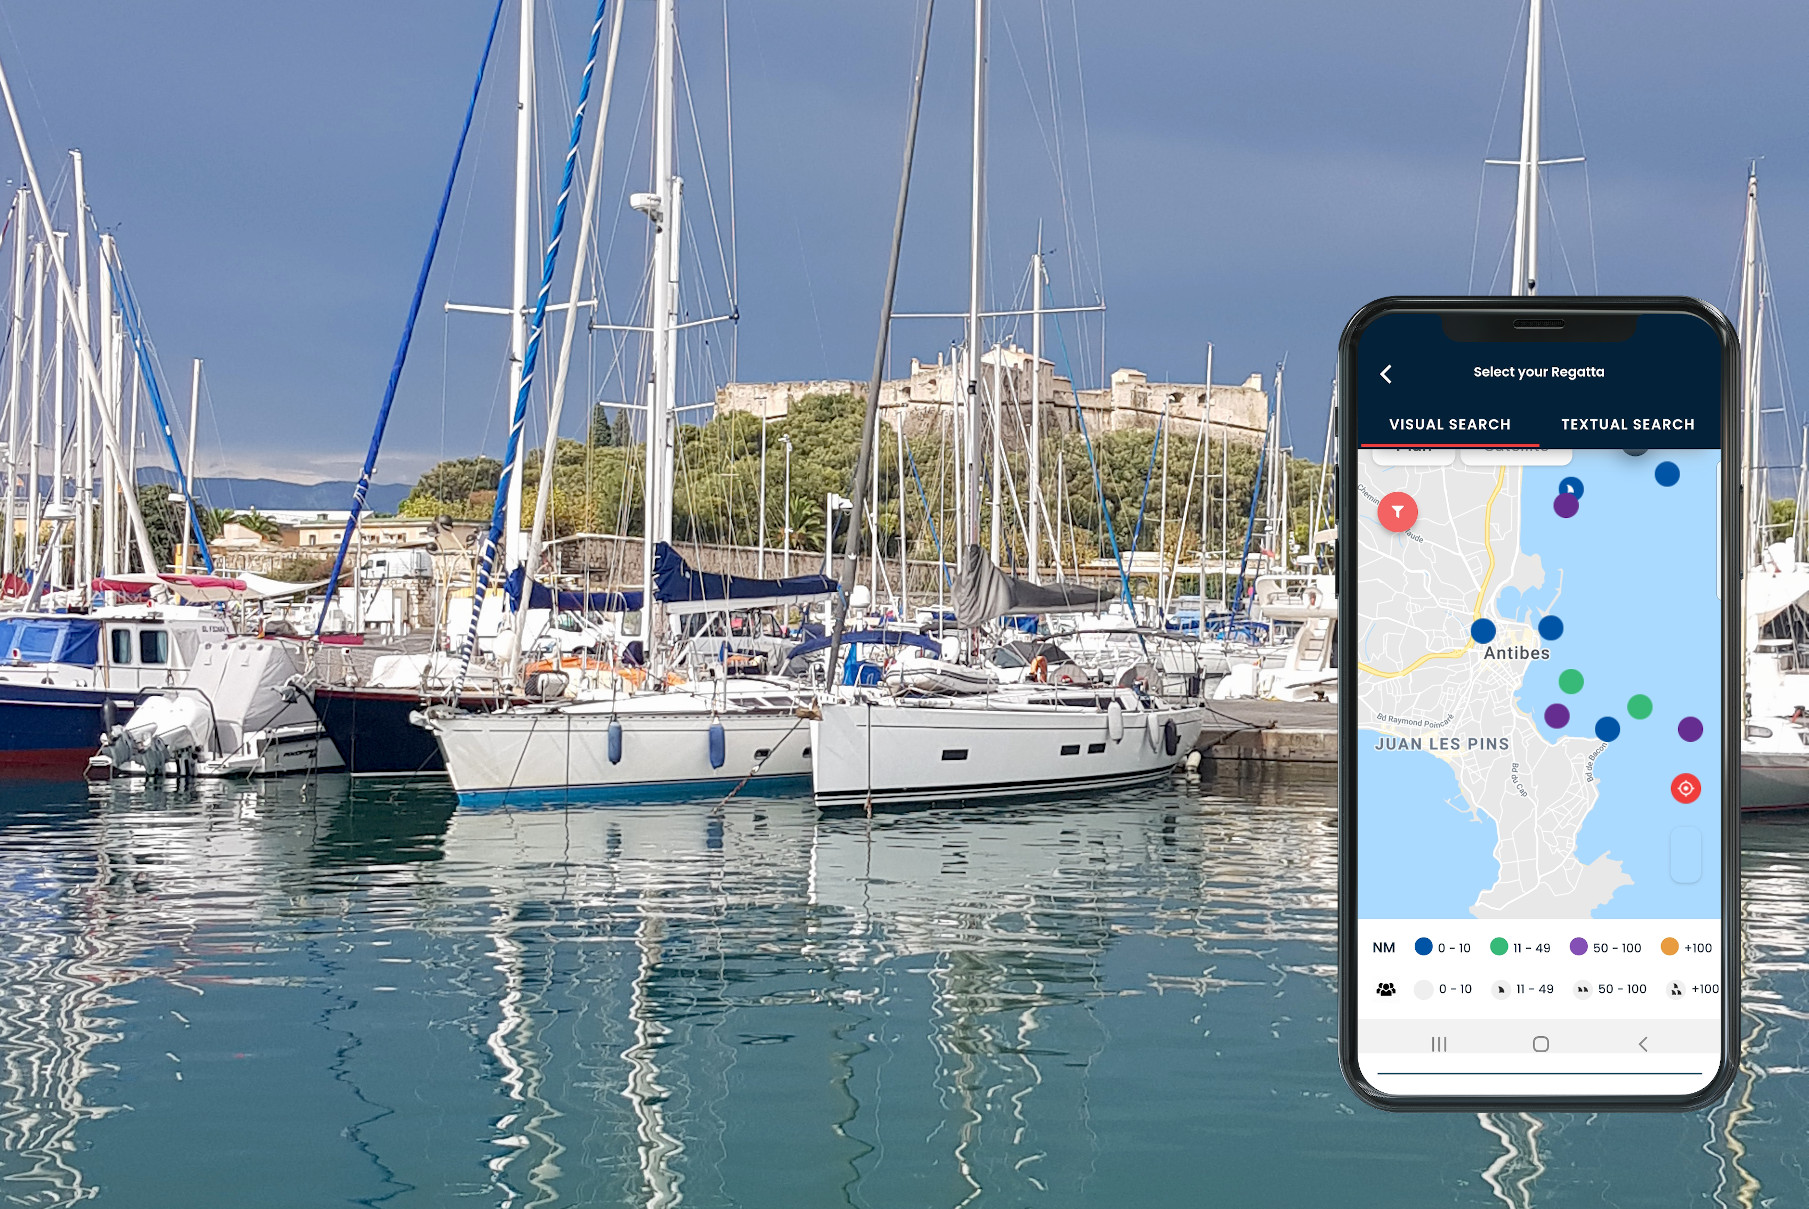 7 Sailing Challenges available at Antibes – French Riviera